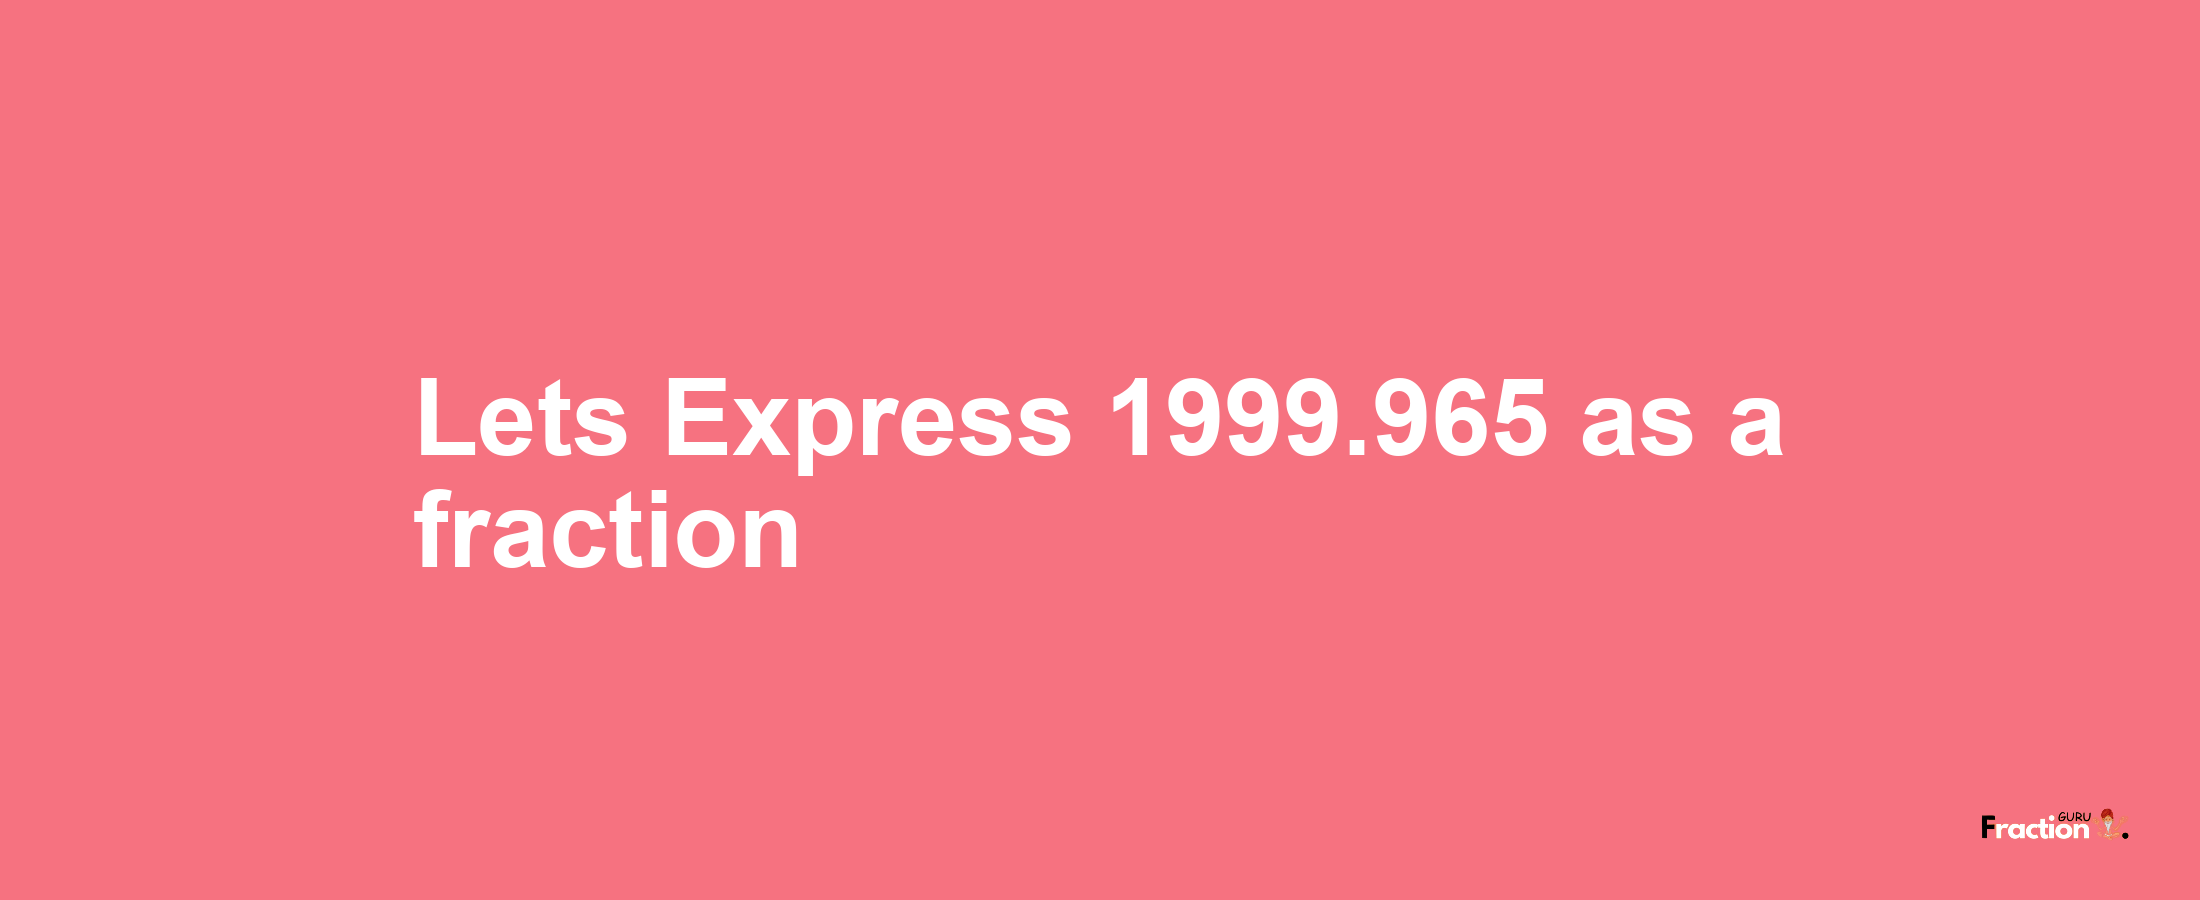 Lets Express 1999.965 as afraction